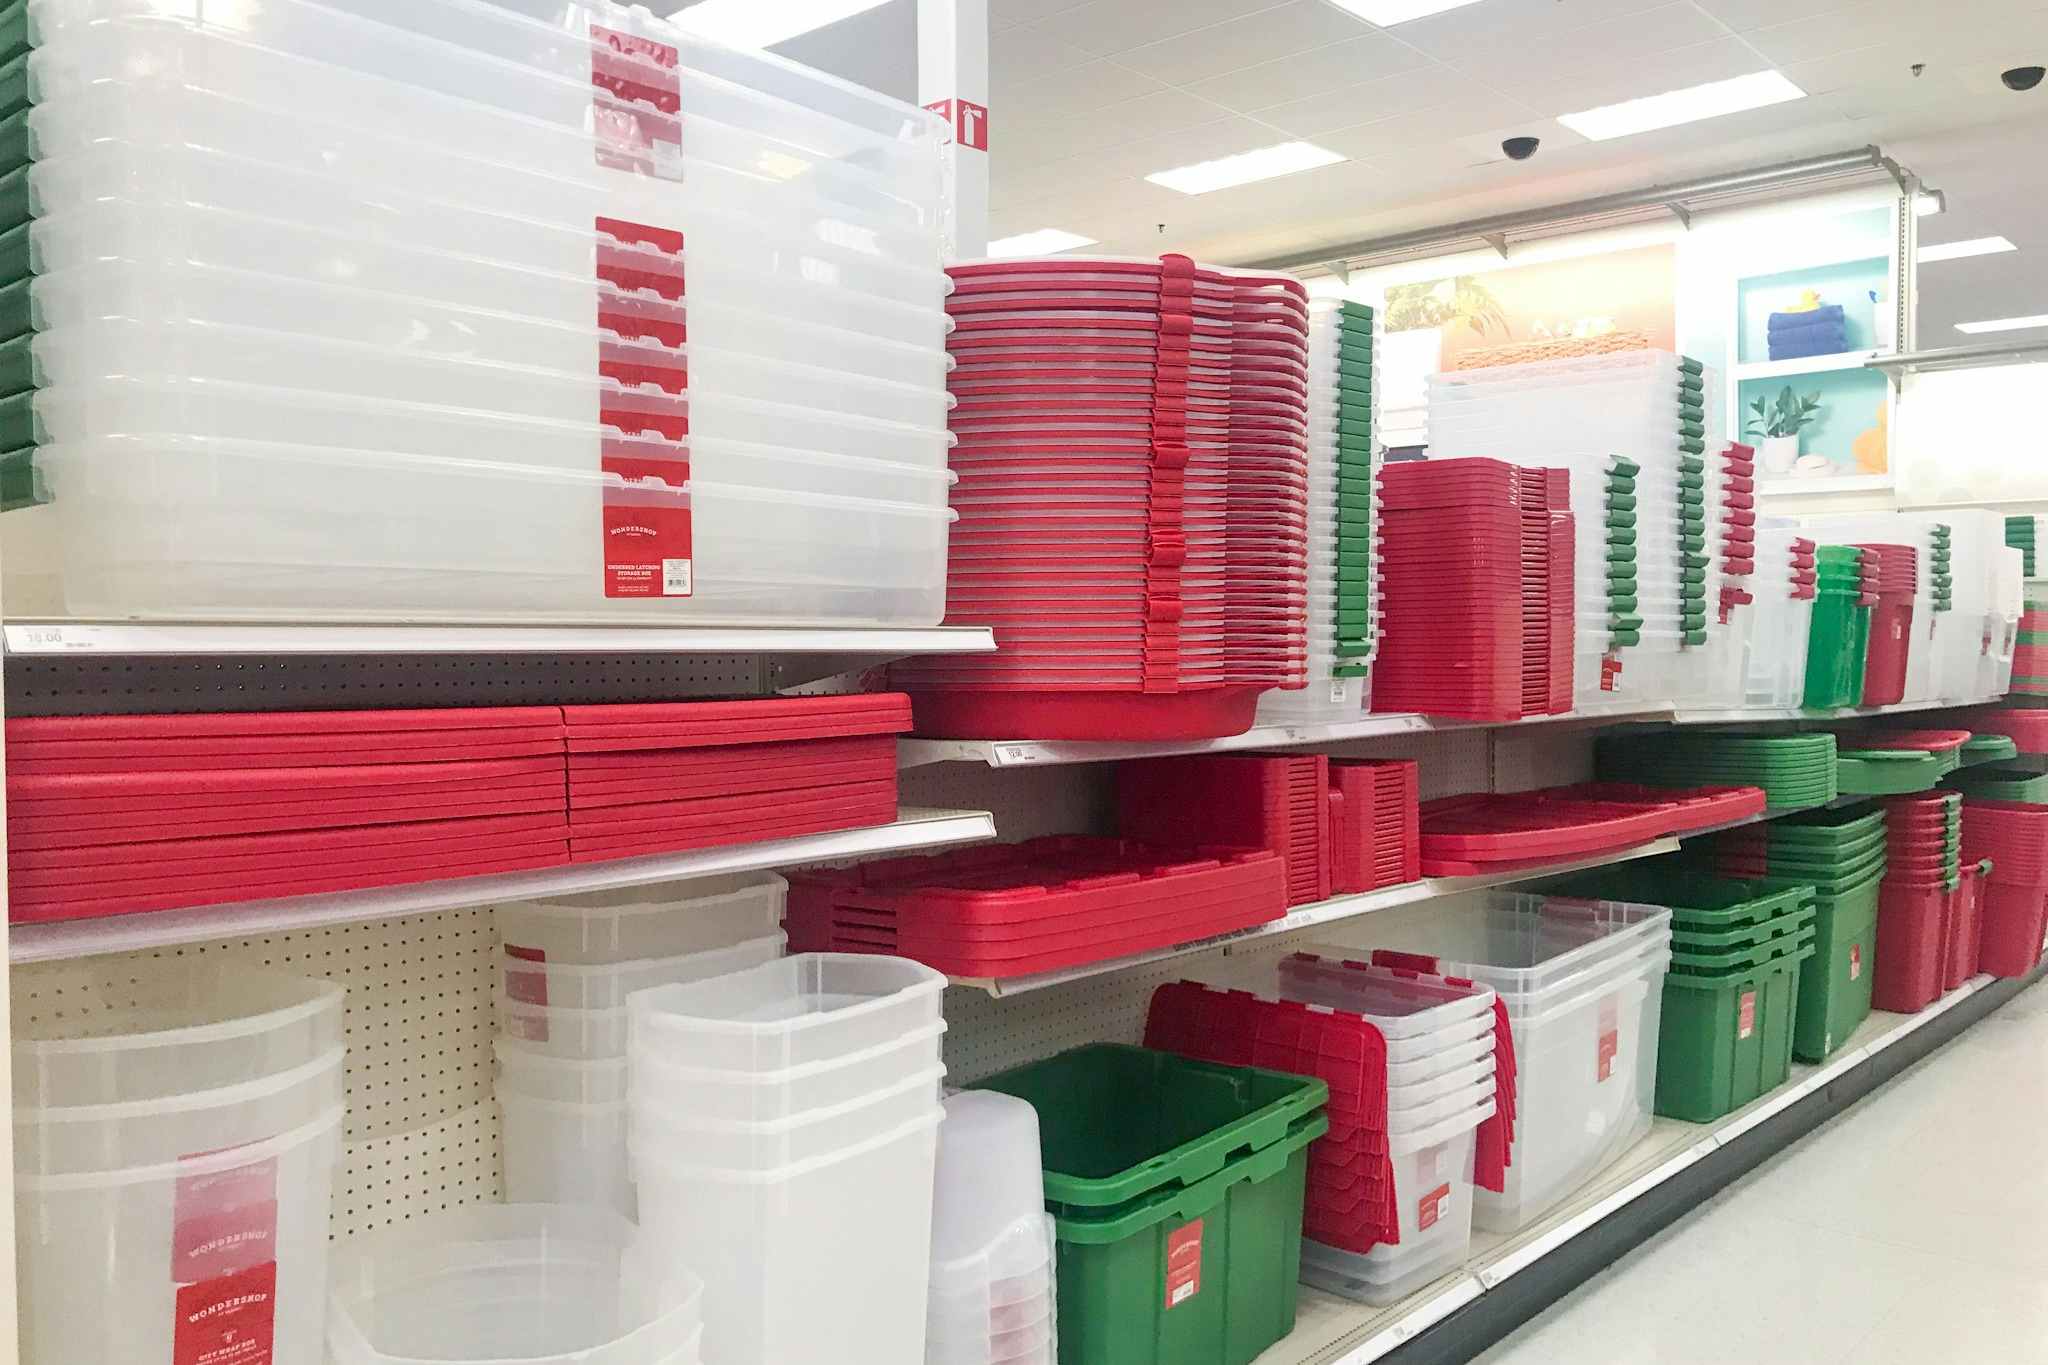 Hot Storage Deals at Target: $5.70 Totes, $6.65 Latching Box, and More ...